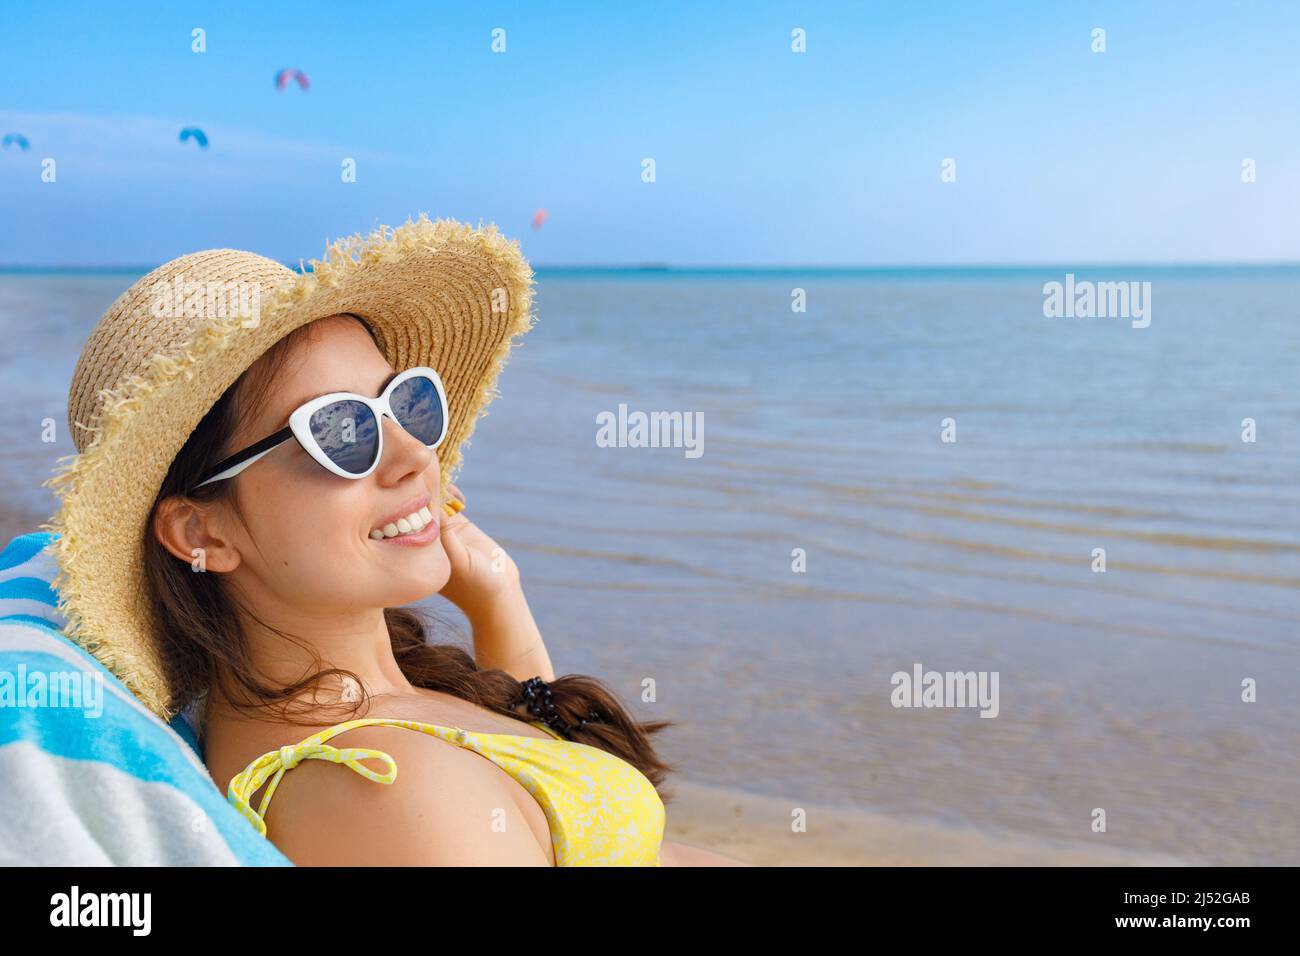 portrait of smiling woman in straw hat and sunglasses relaxing on sun lounger Stock Photo